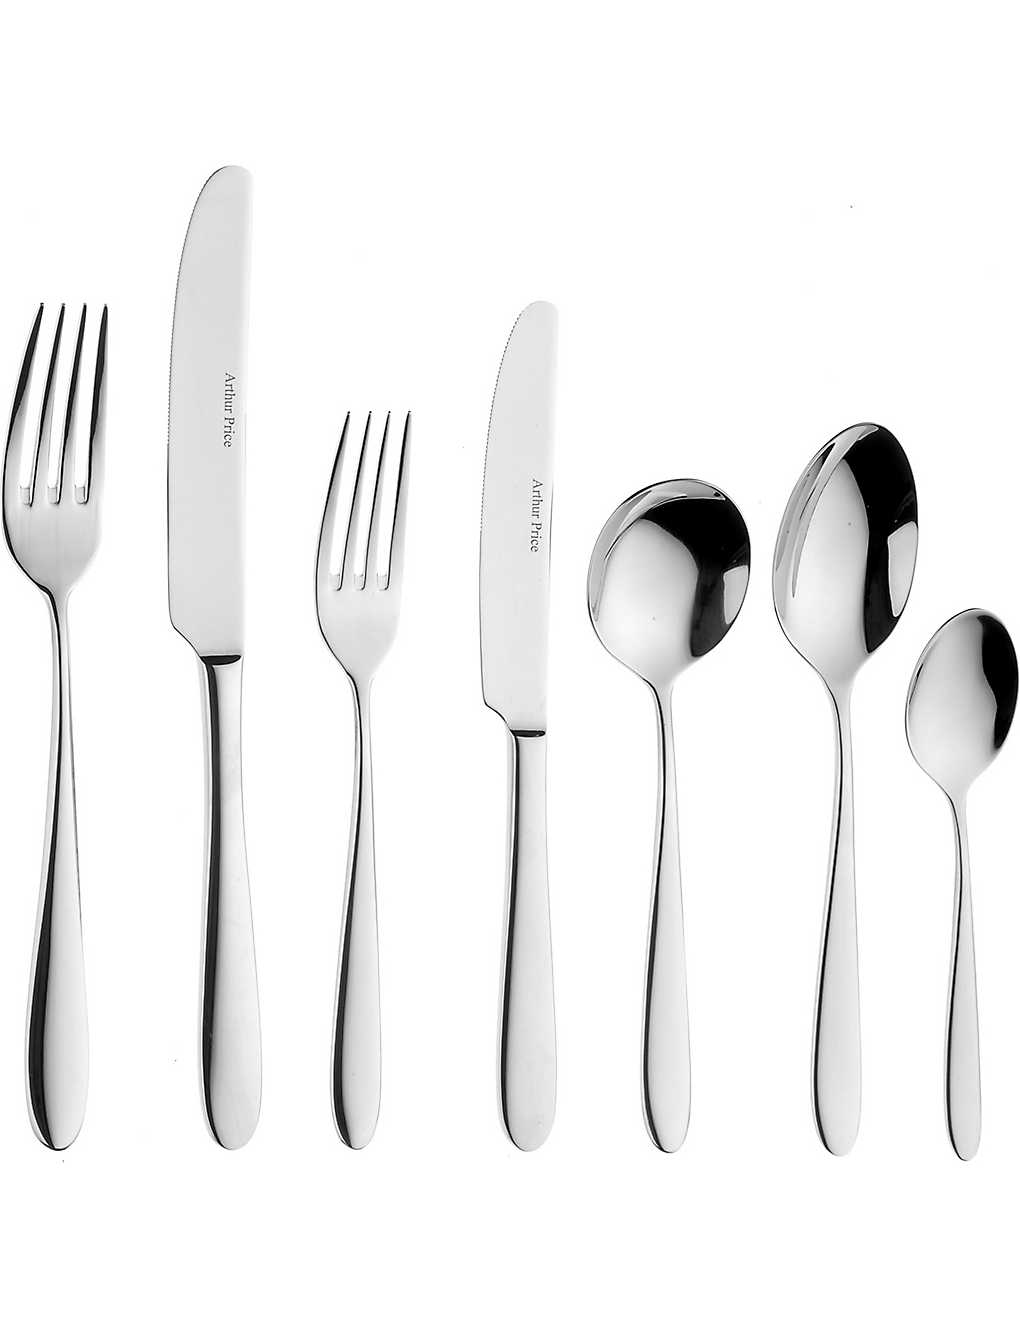 Arthur Price Willow 7-piece Stainless Steel Place Set